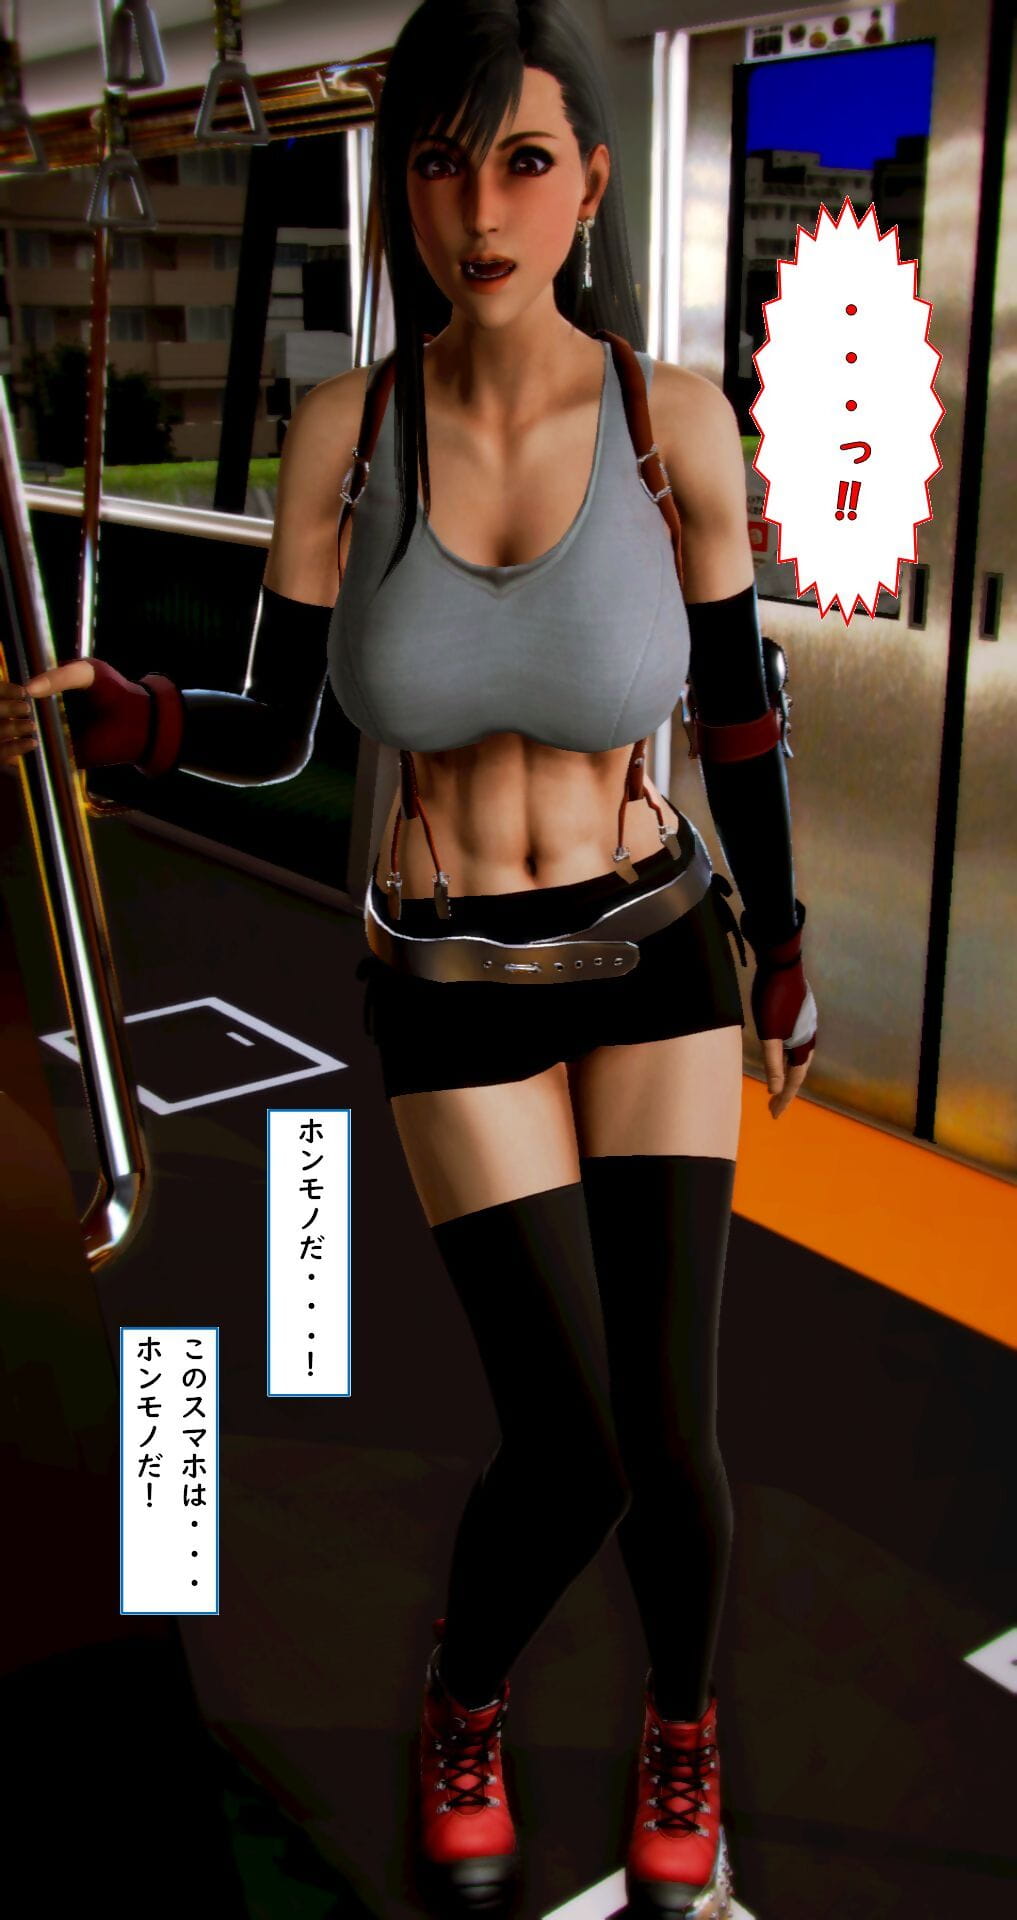 Tifa greater than Underpass - fixing 2